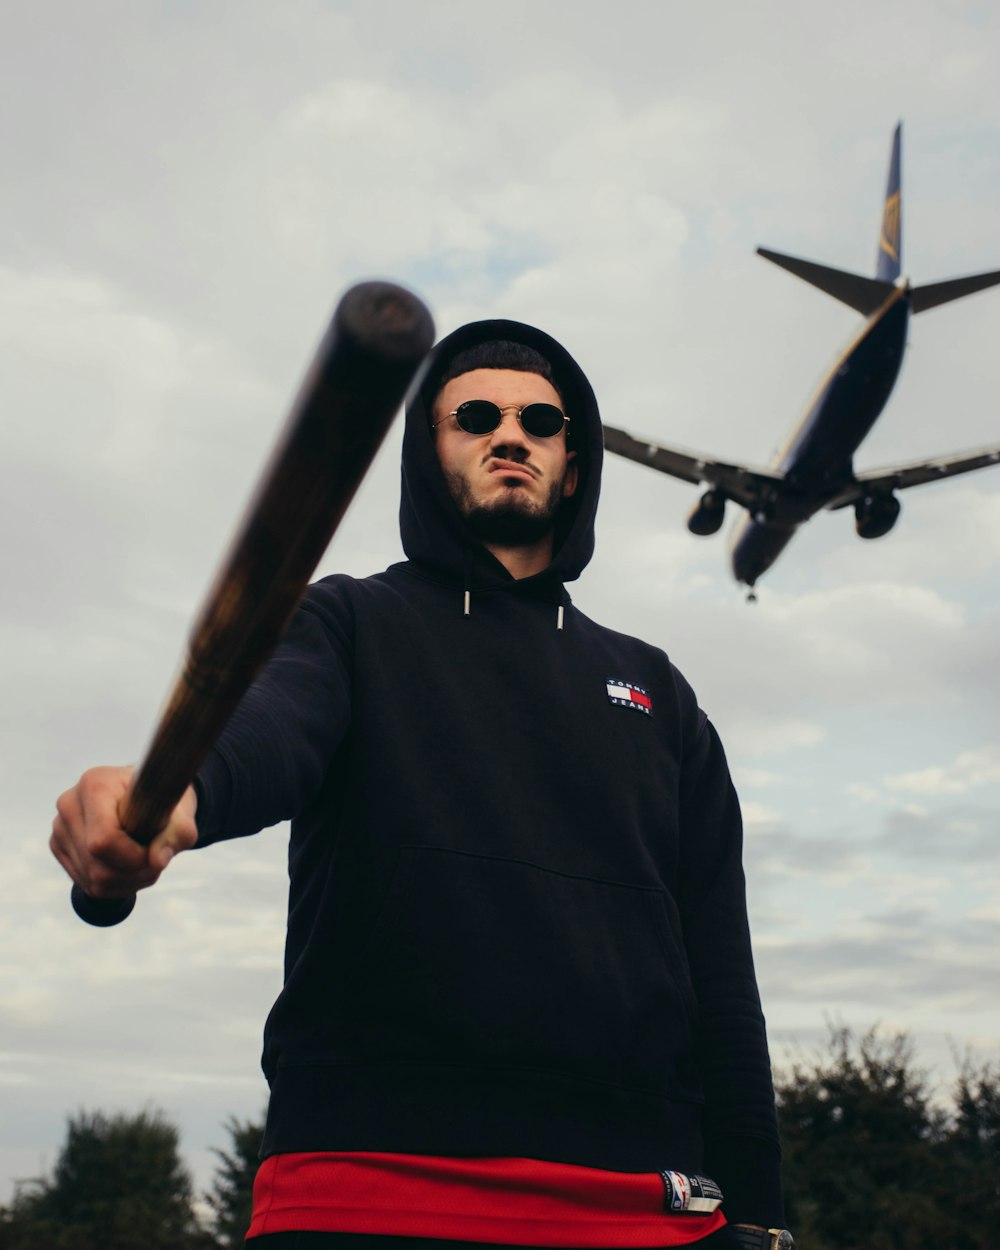 a man holding a baseball bat in front of an airplane